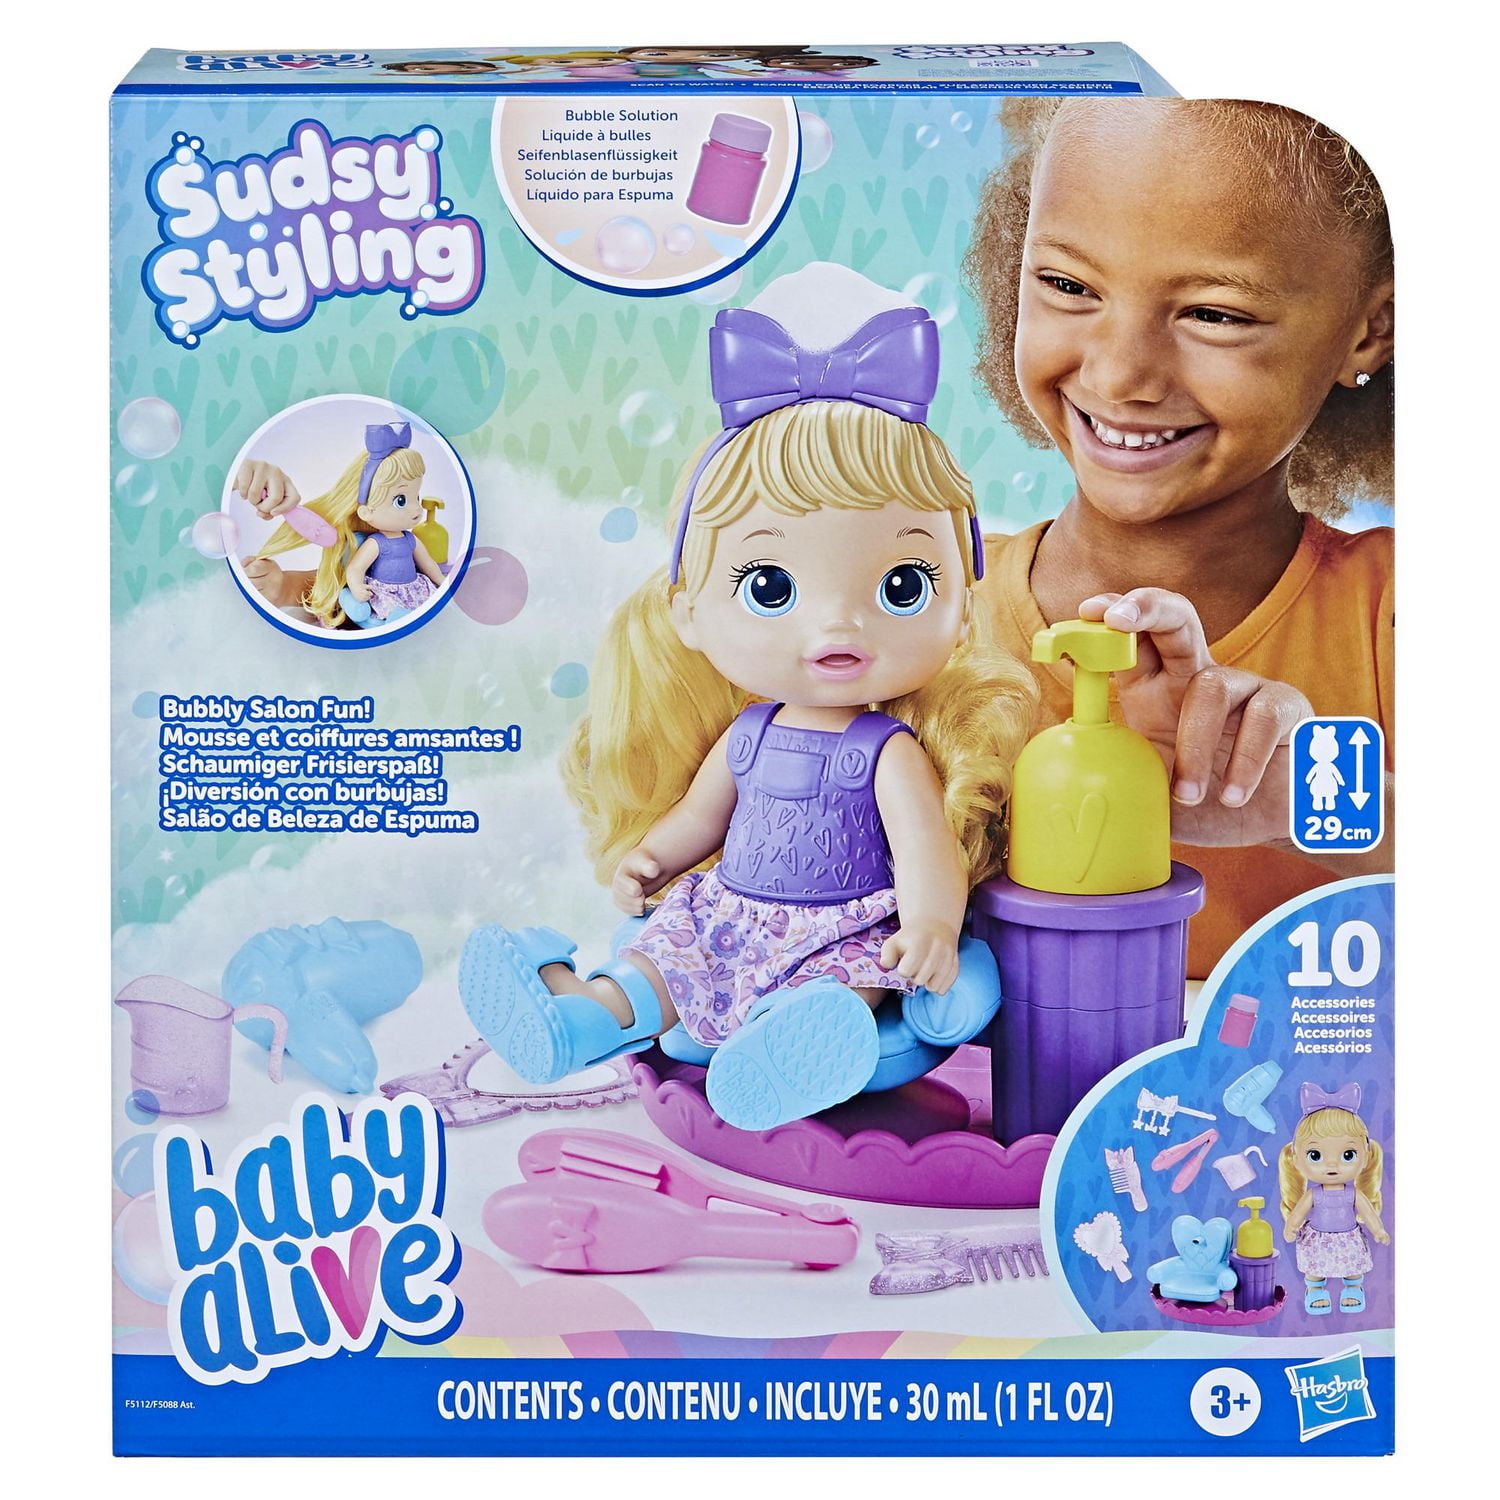 Baby Alive Sudsy Styling Doll, Includes Baby Doll Salon Chair, Accessories, Bubble  Solution, Blonde Hair 